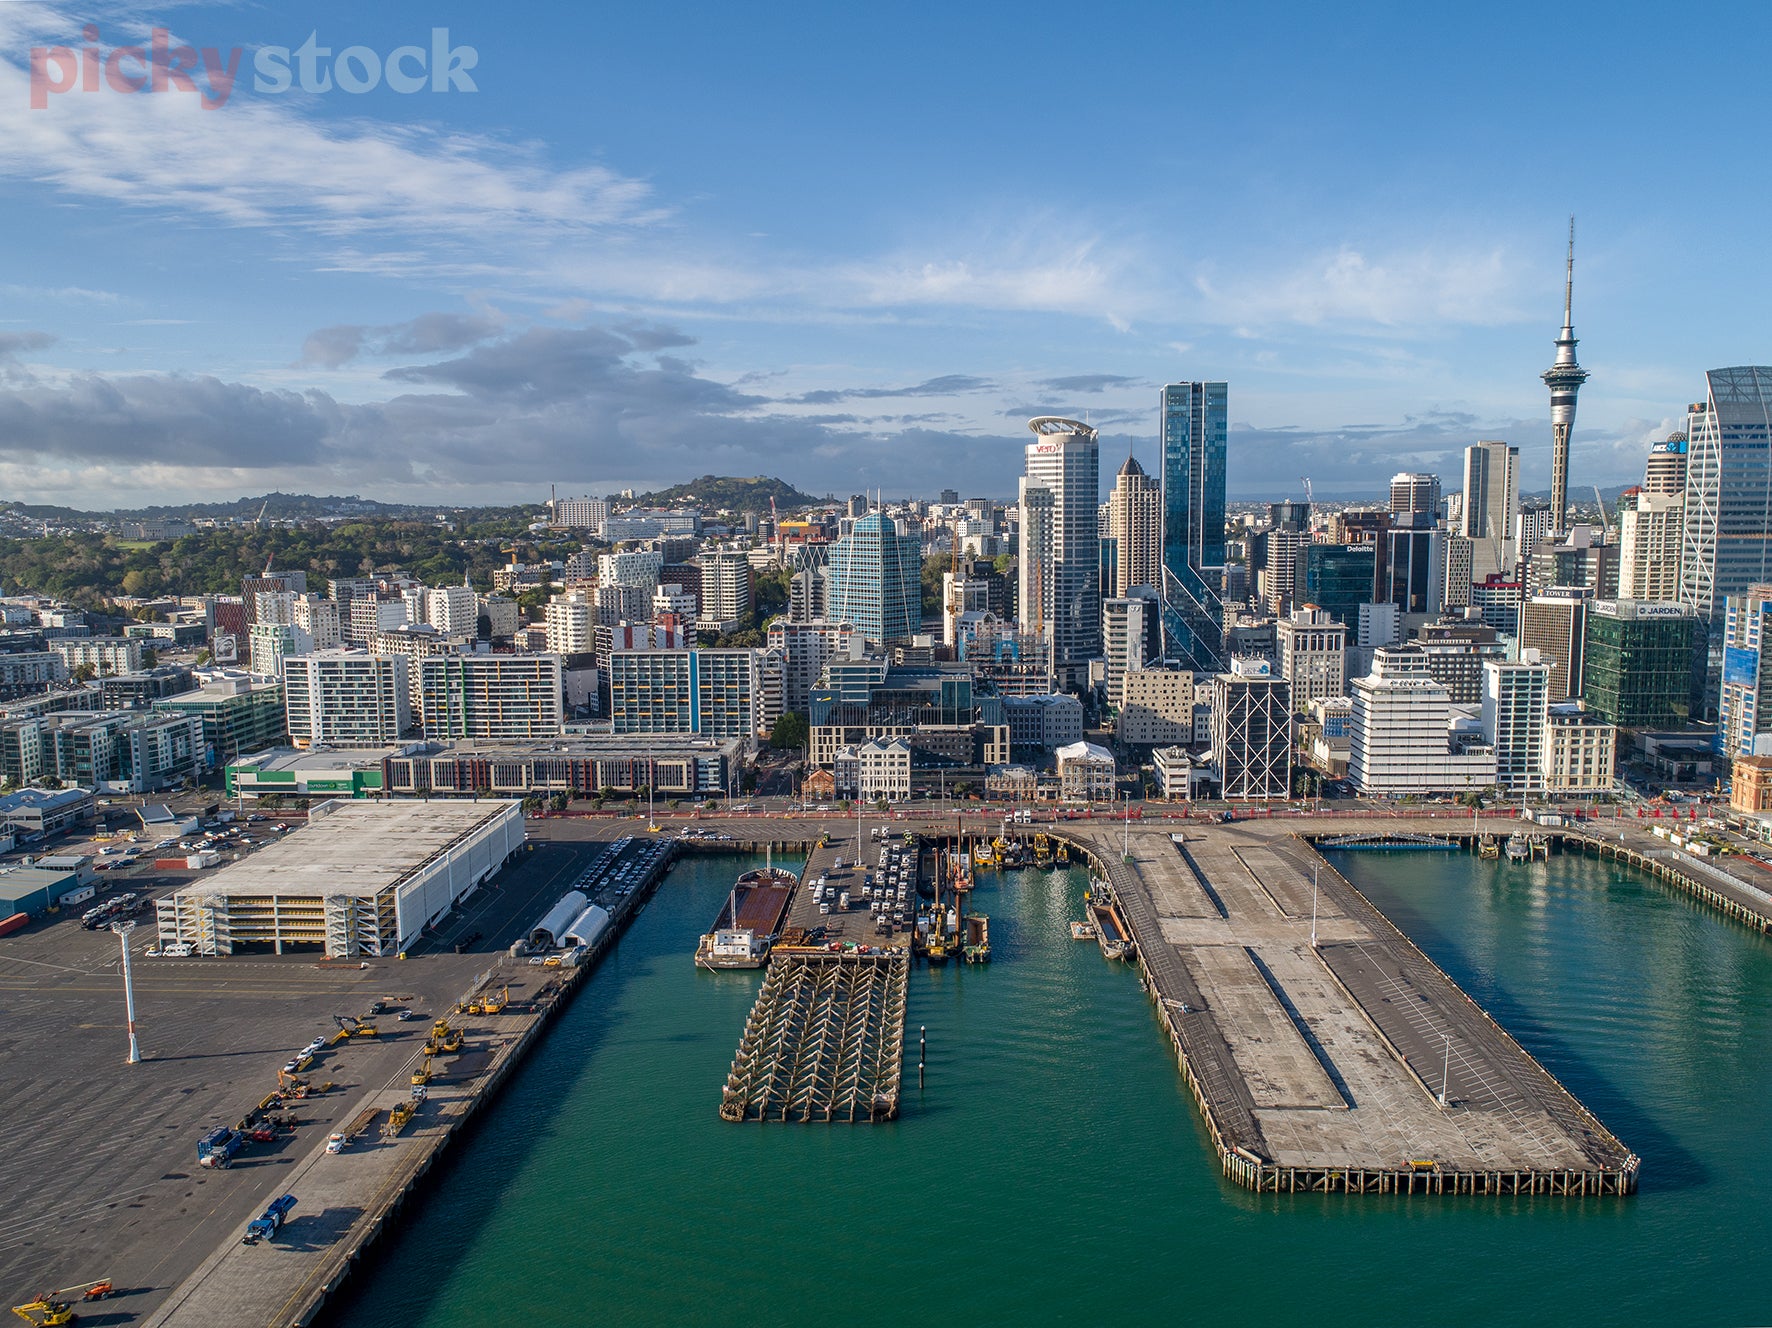 High angle image looking from Waitemata Harbour in along the ferry docks of Auckland City towards the big high rises and city scrapers. Blue sky and blue waters. 